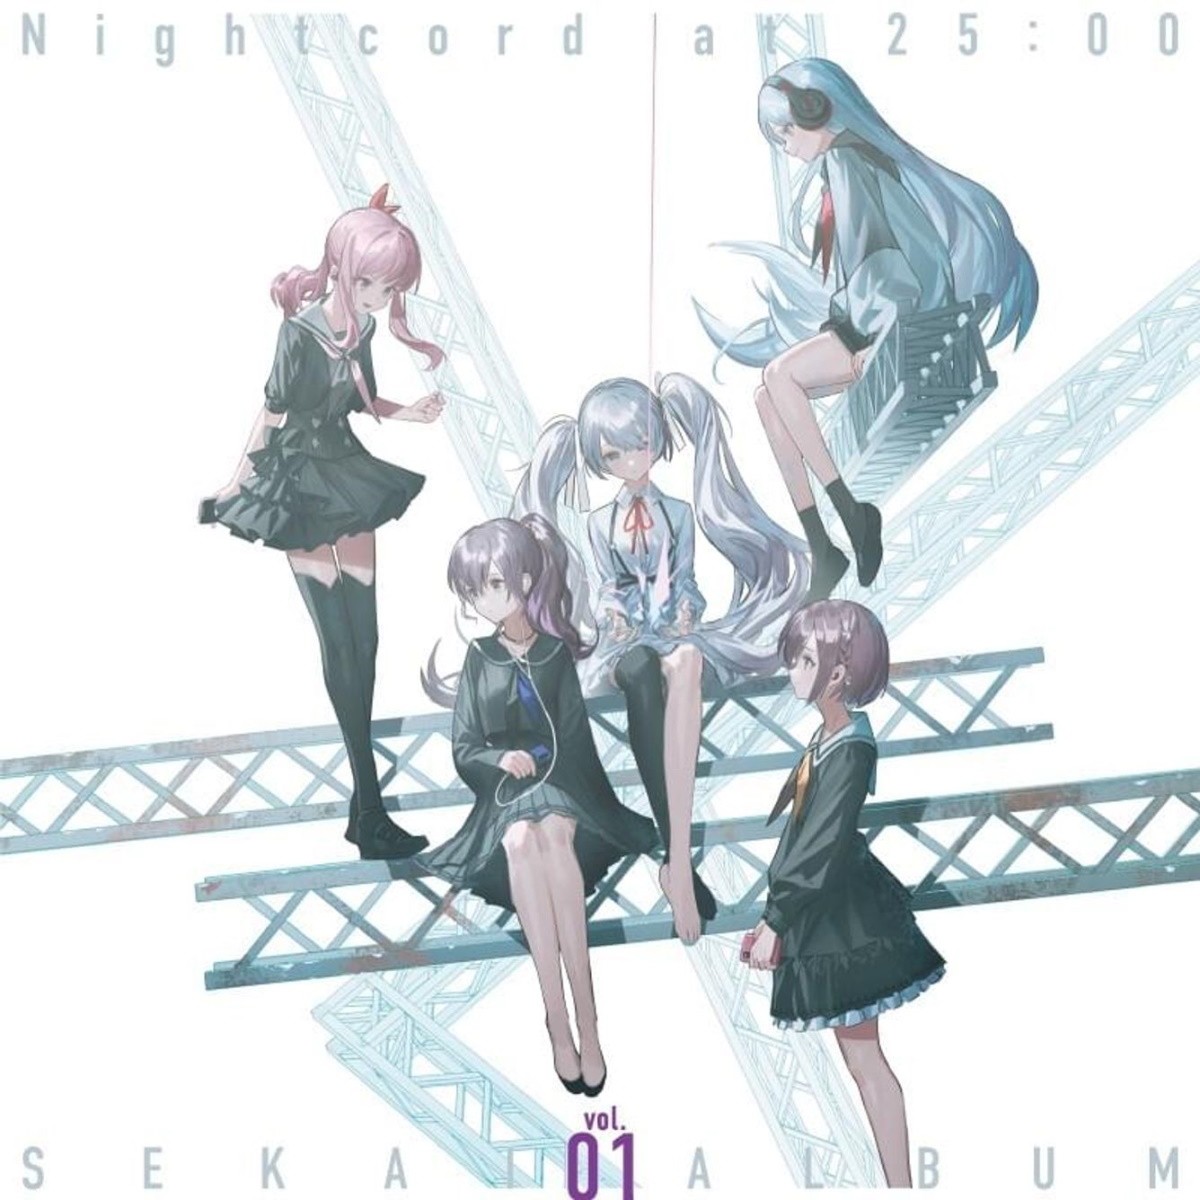 Cover for『Nightcord at 25:00 - Hated By Life Itself』from the release『Nightcord at 25:00 SEKAI ALBUM vol.1』